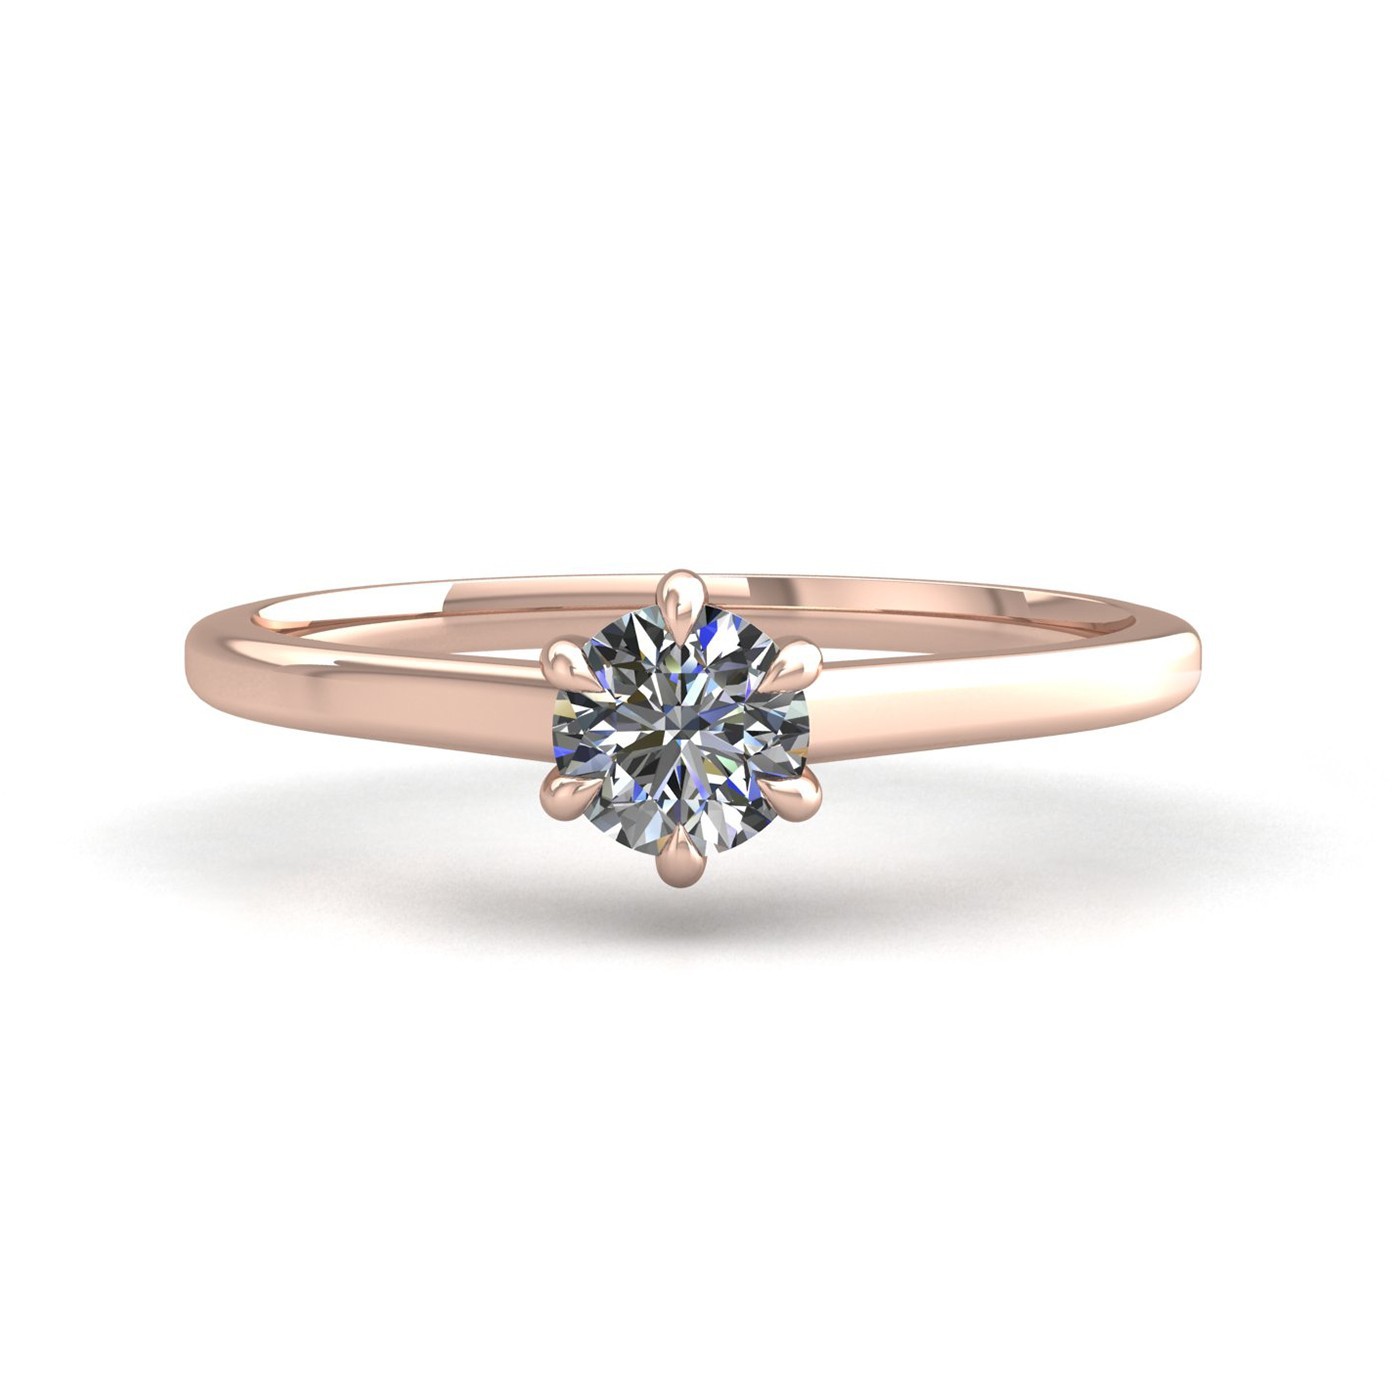 18k rose gold 1,50 ct 6 prongs solitaire round cut diamond engagement ring with whisper thin band Photos & images